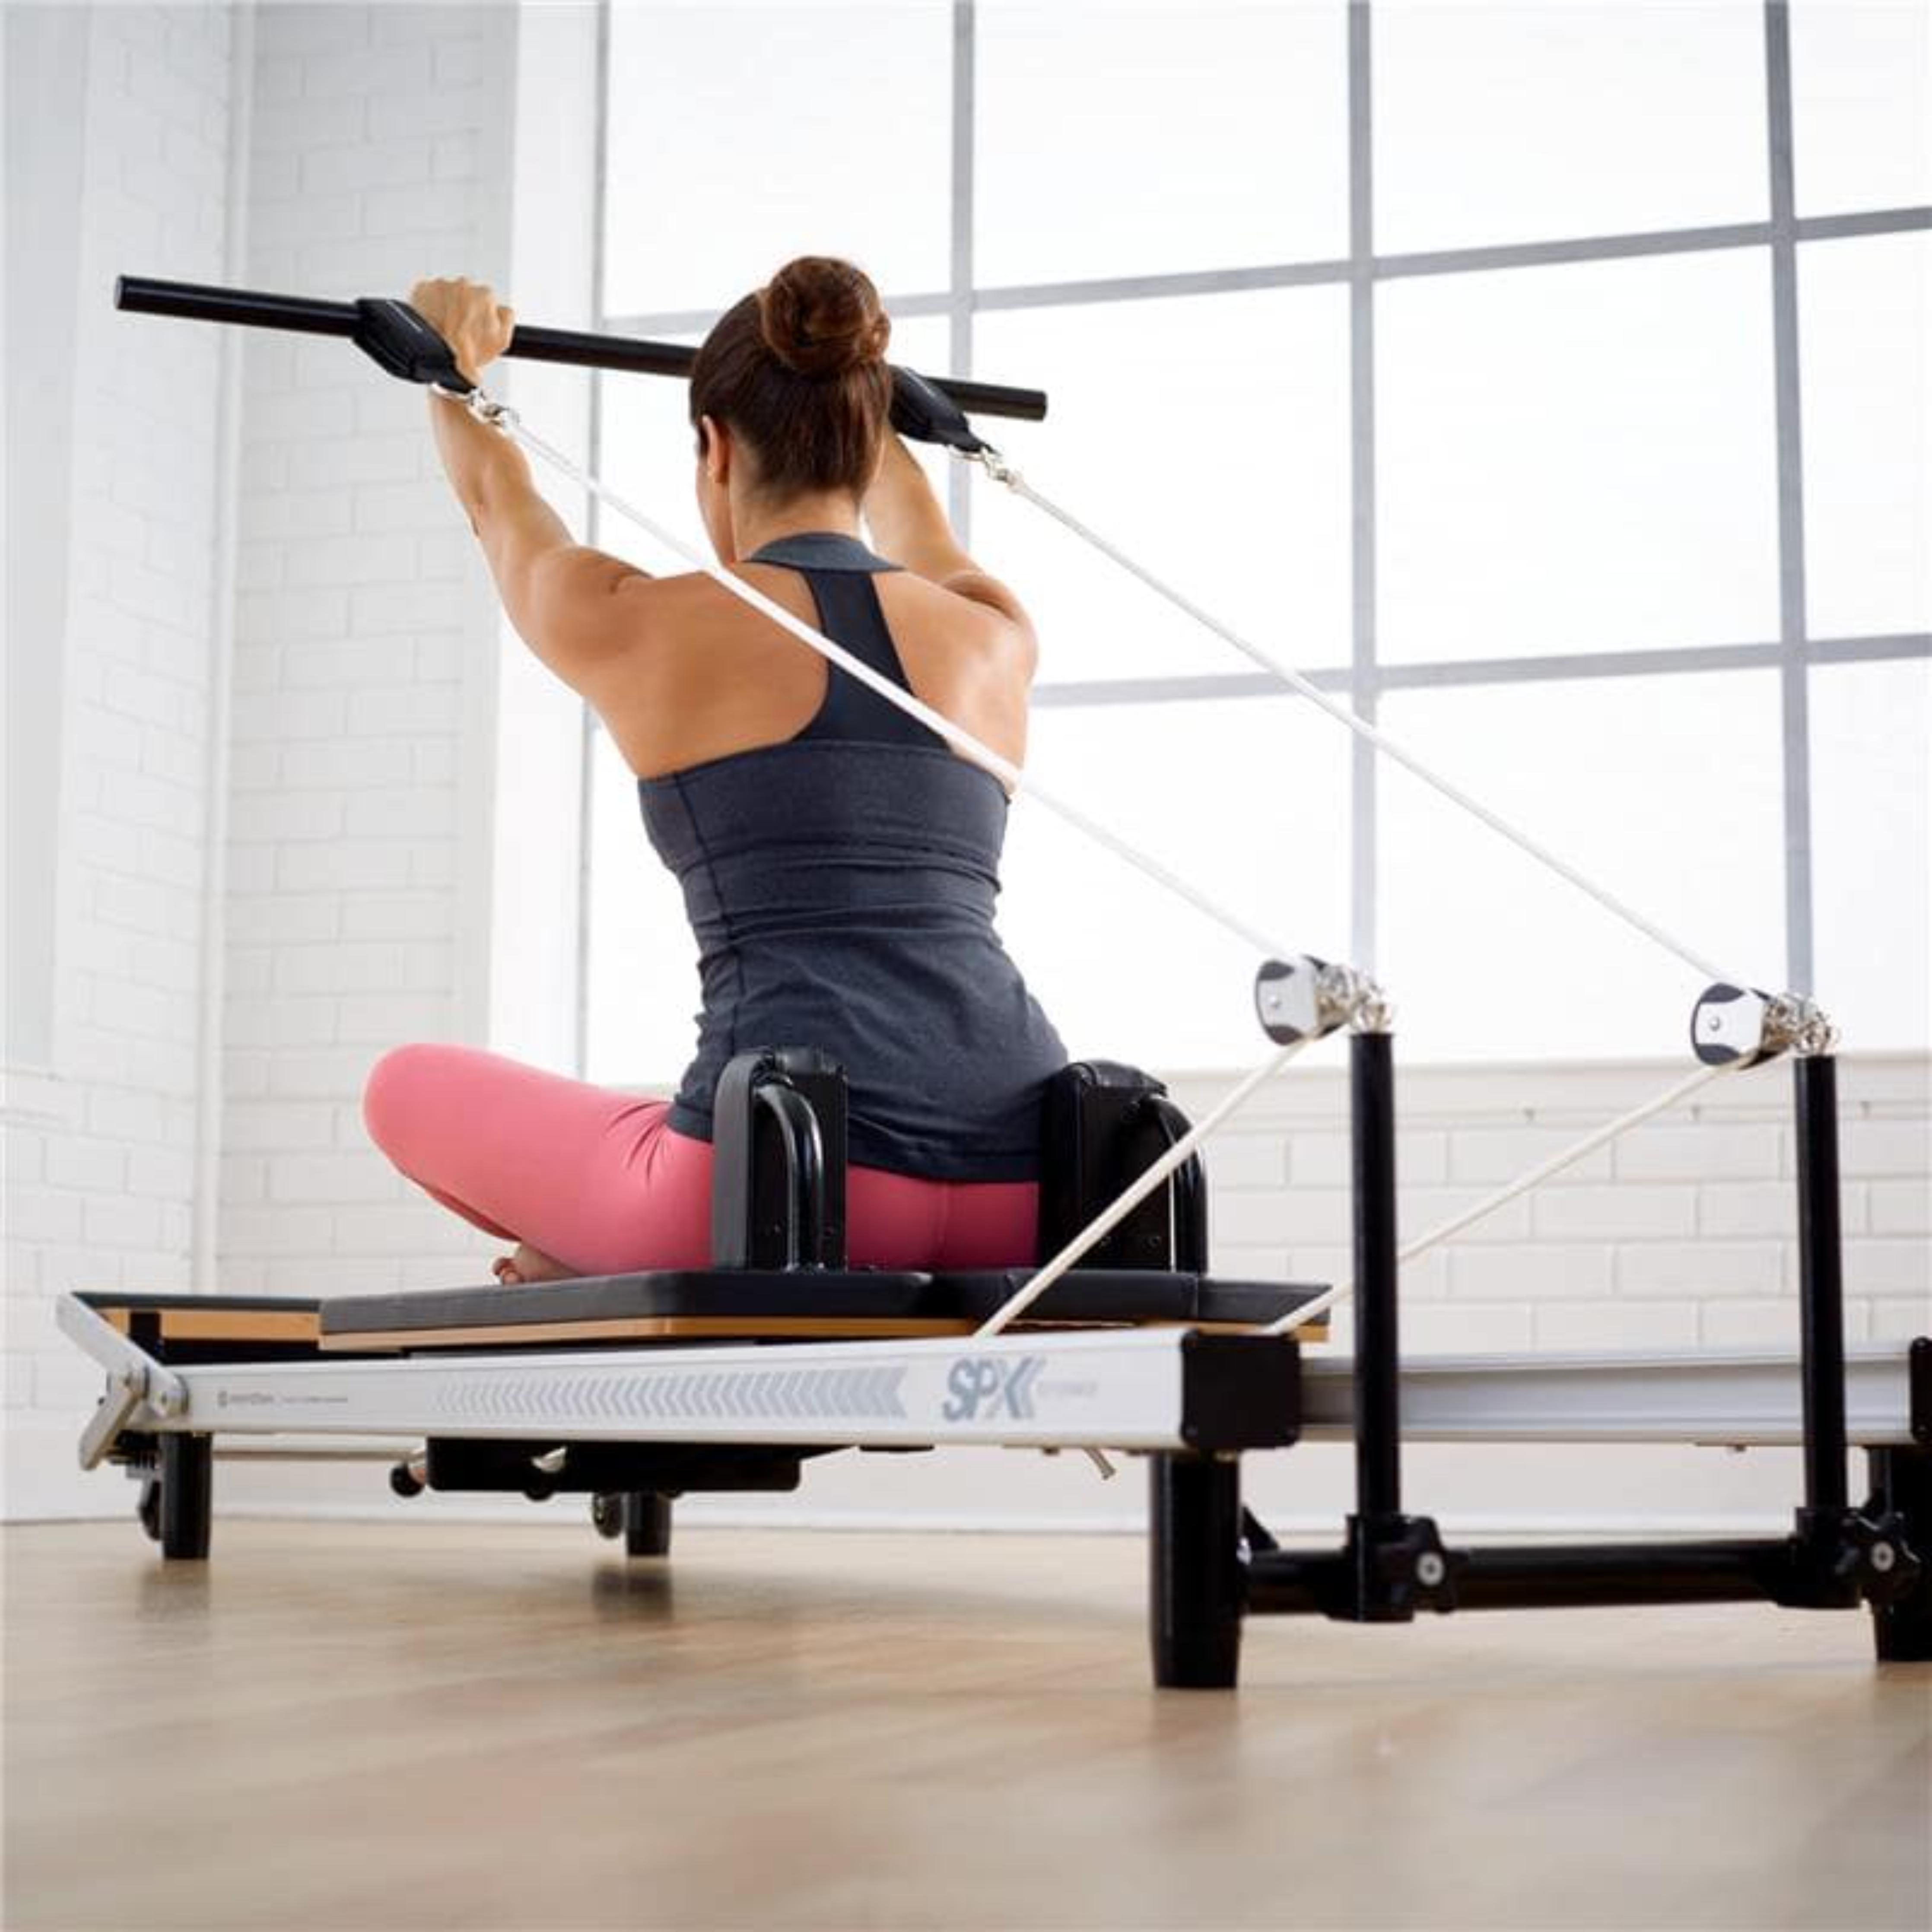 Woman engaging in lower body sculpting on Merrithew SPX Max Reformer